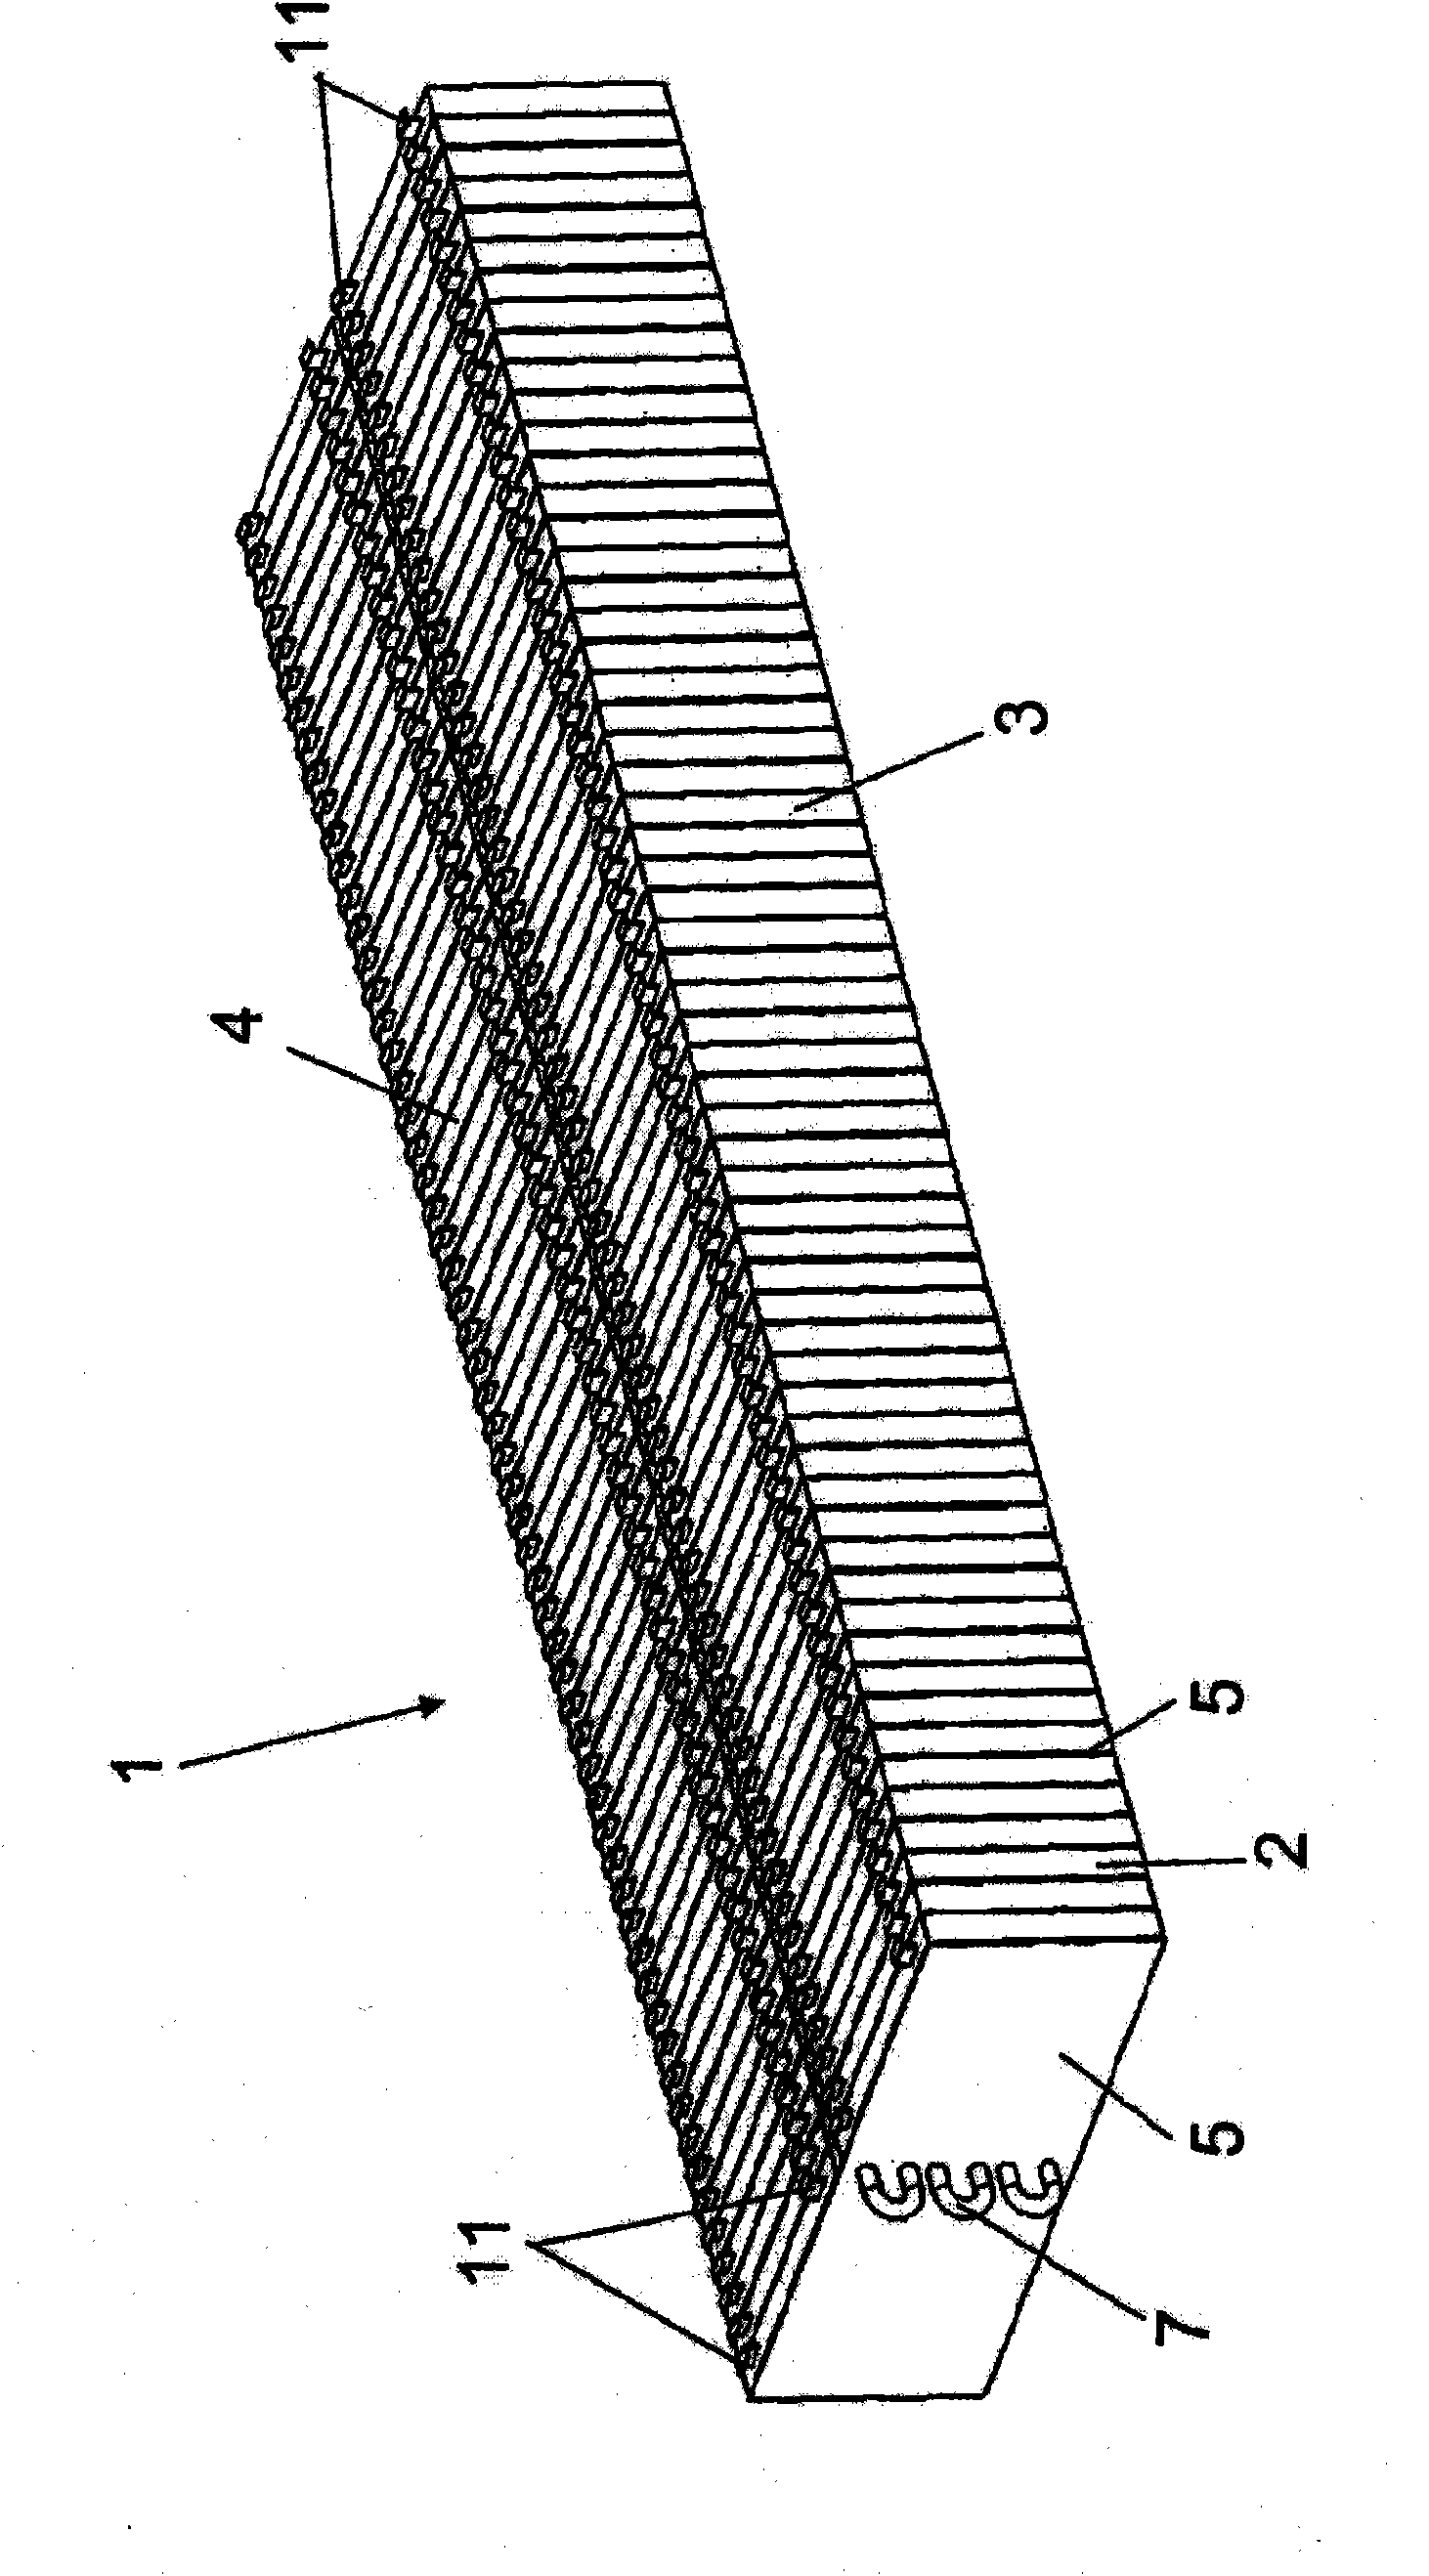 Device for storing electrical energy